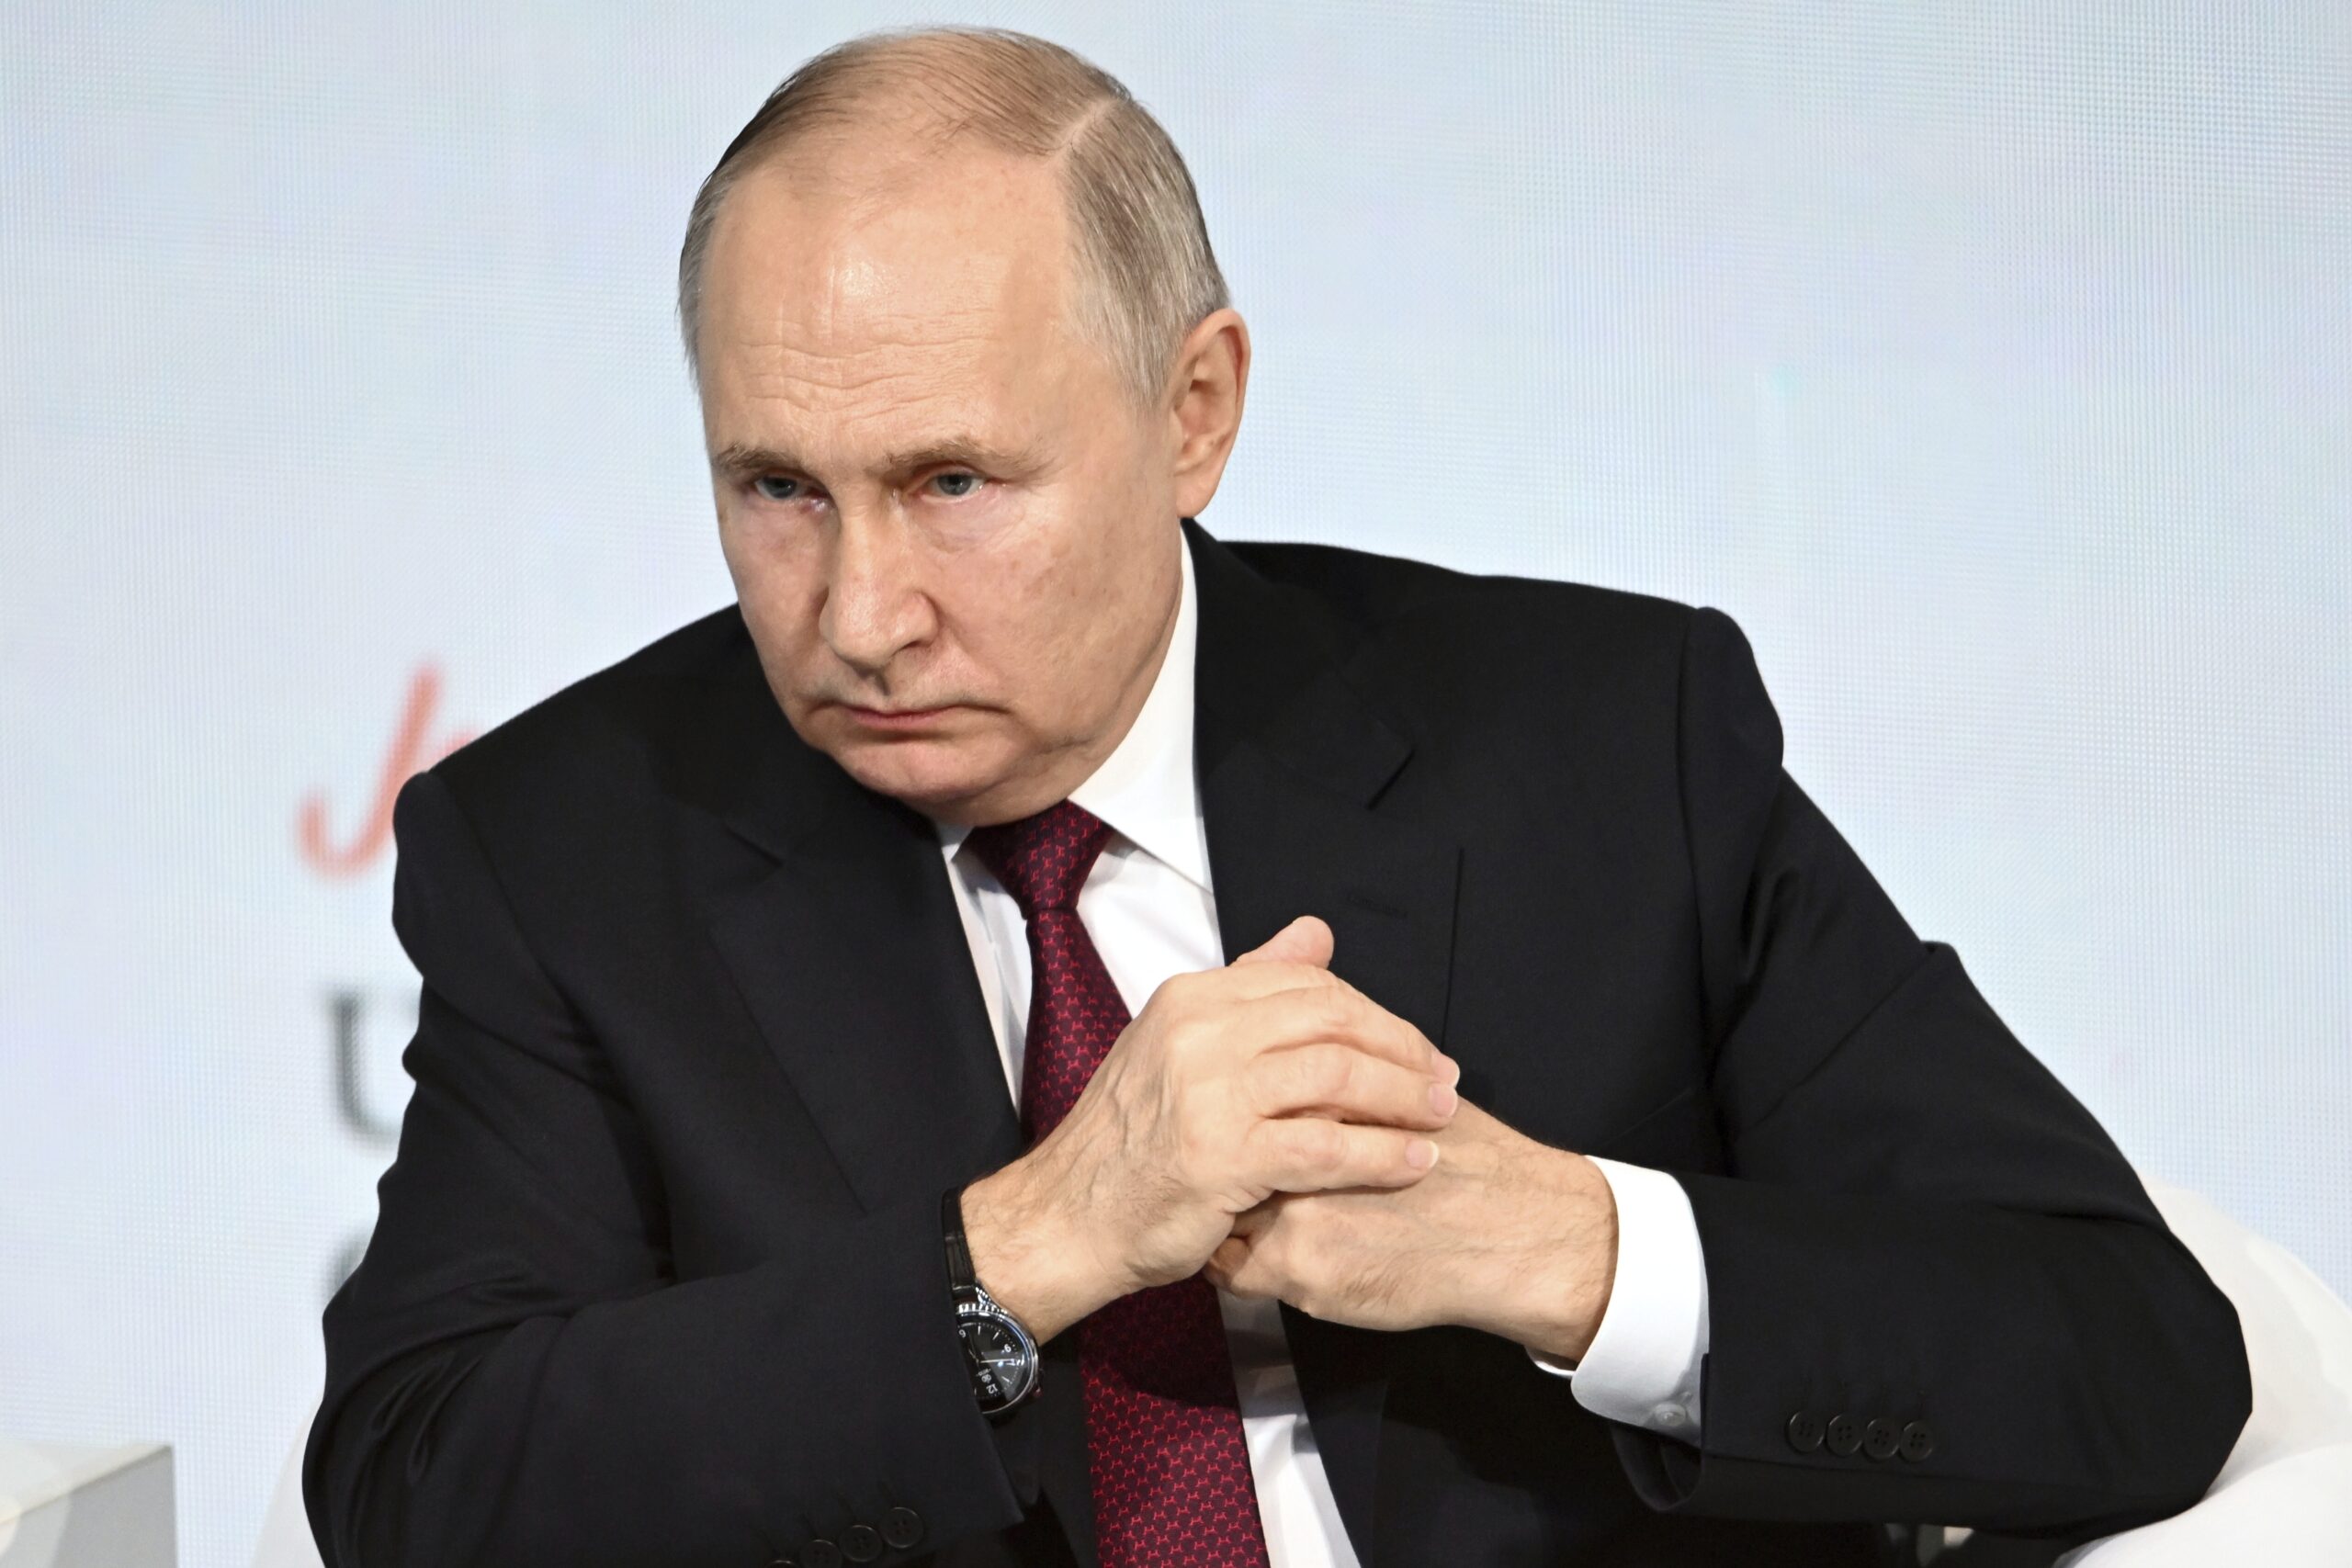 putin-sends-nuclear-threat-during-his-annual-speech-if-russia-is-attacked-by-nato